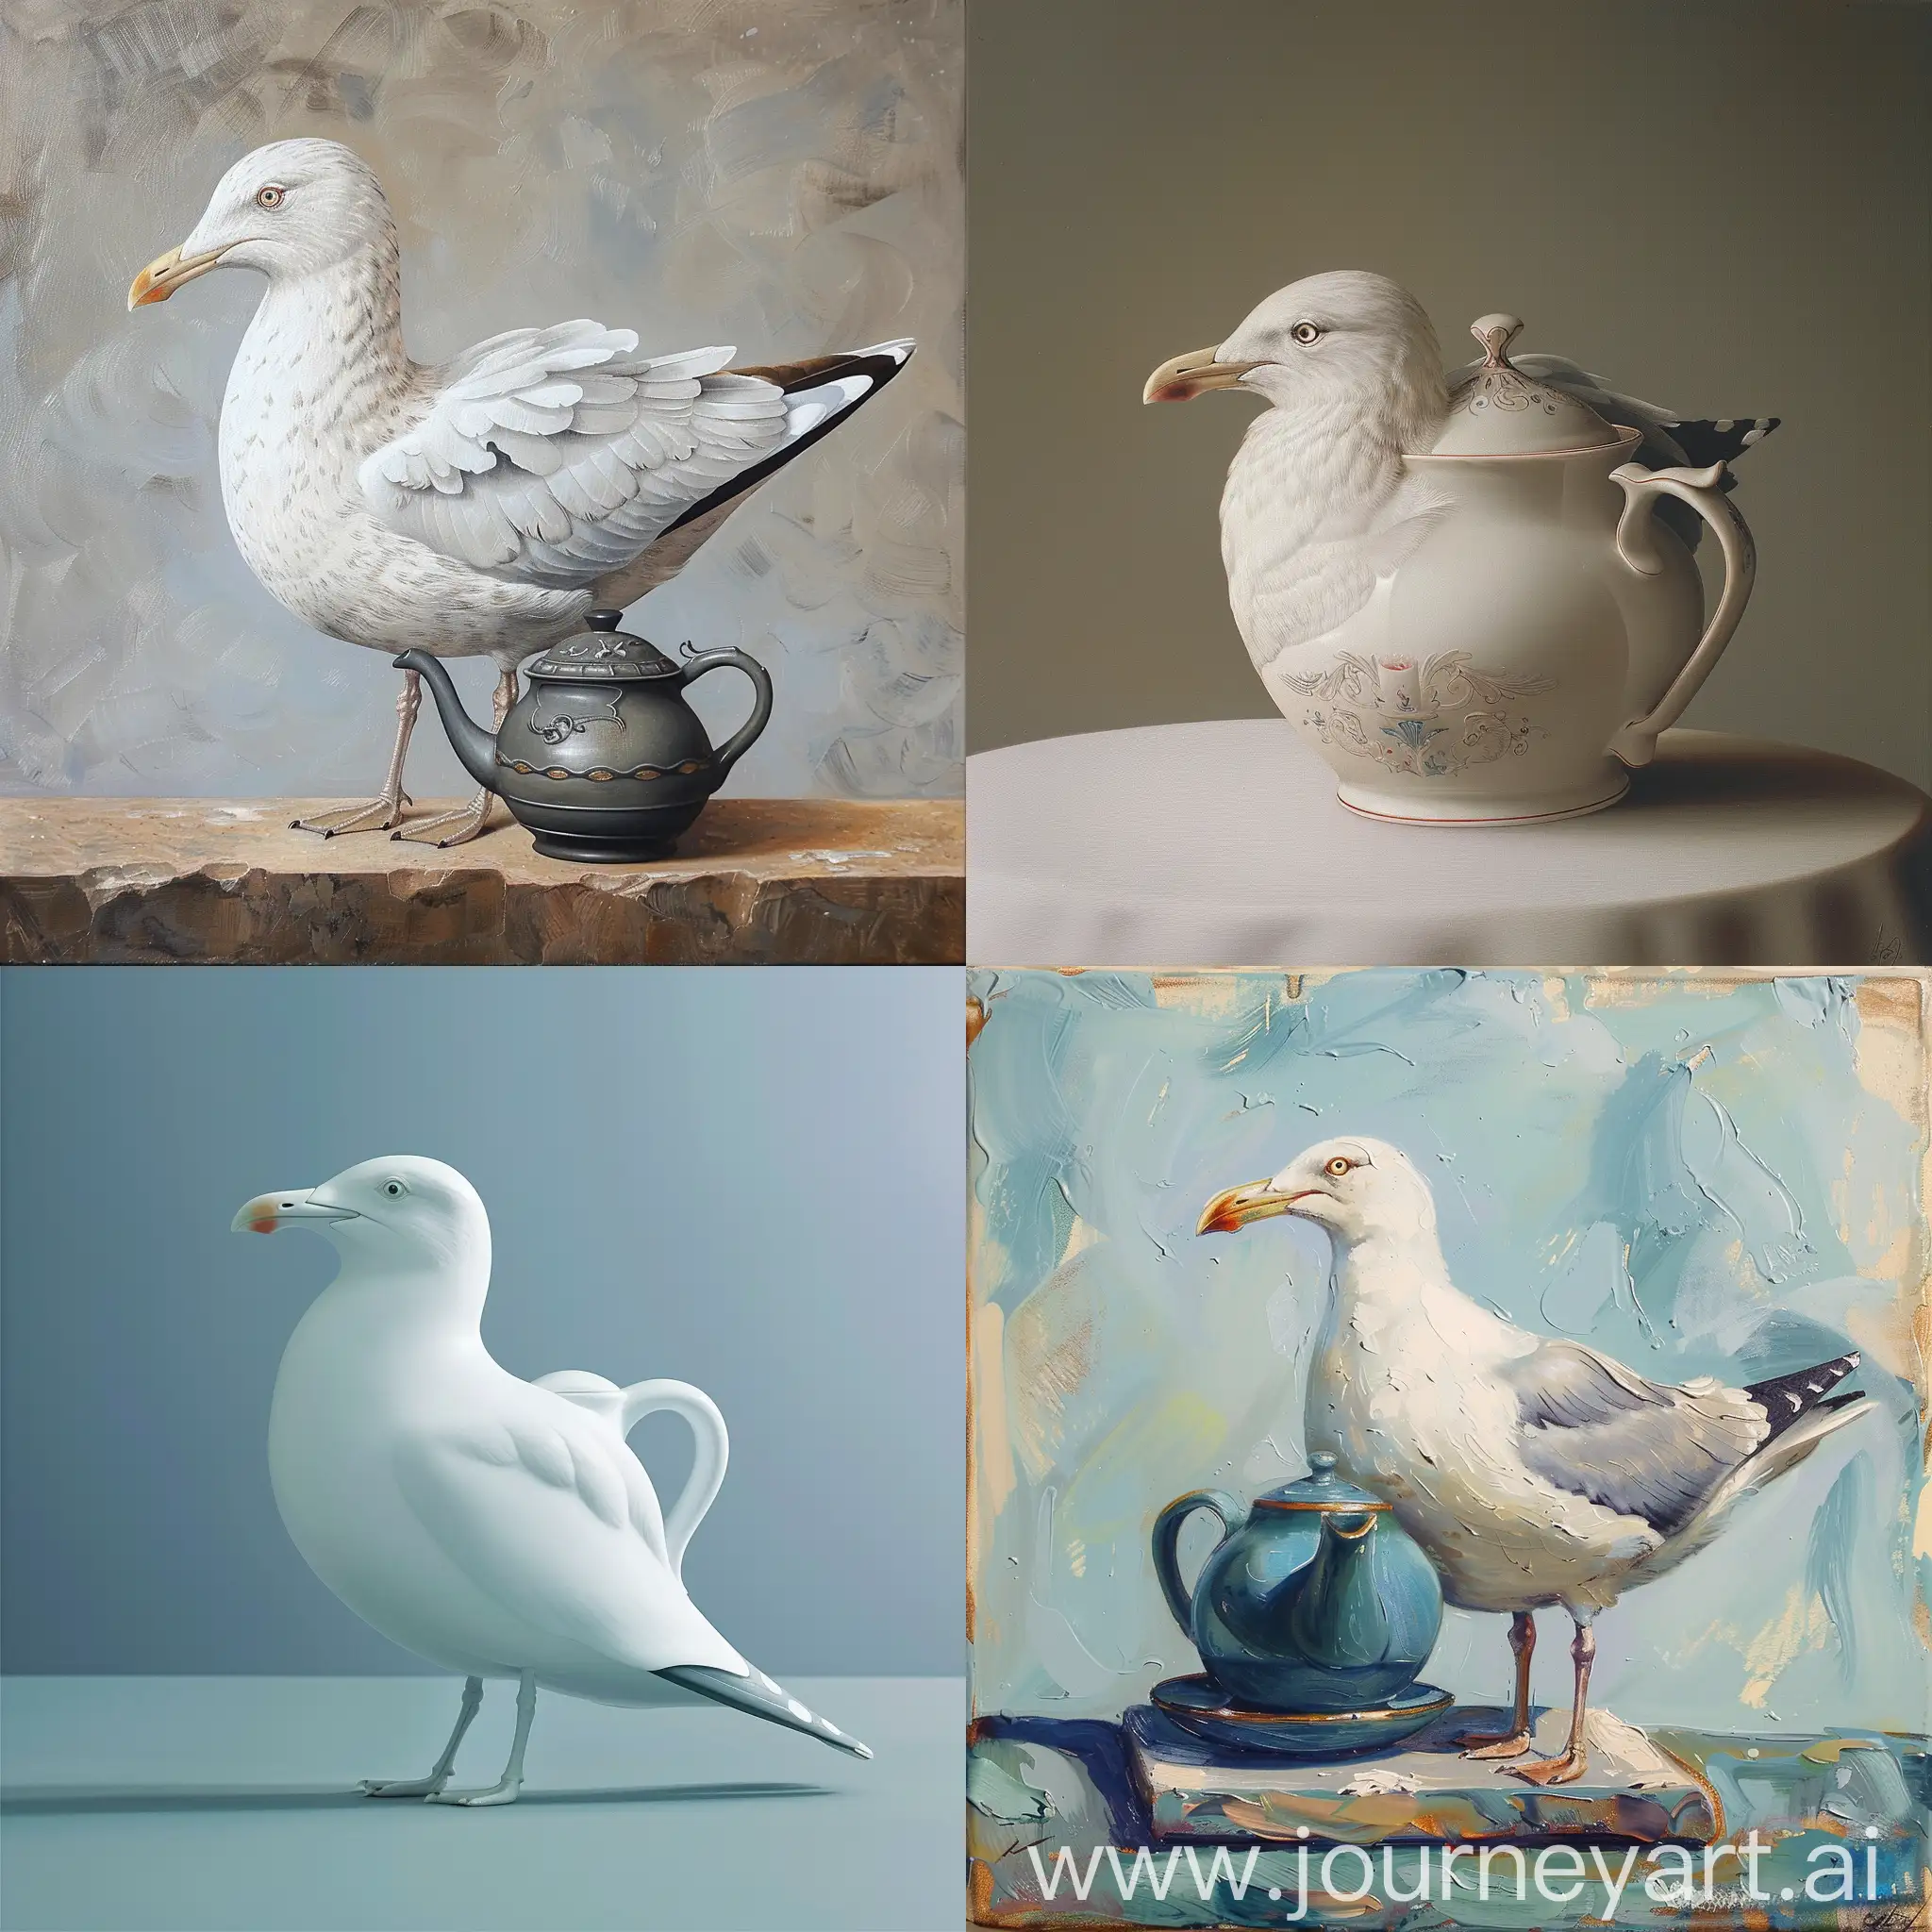 Seagull-perched-on-a-Teapot